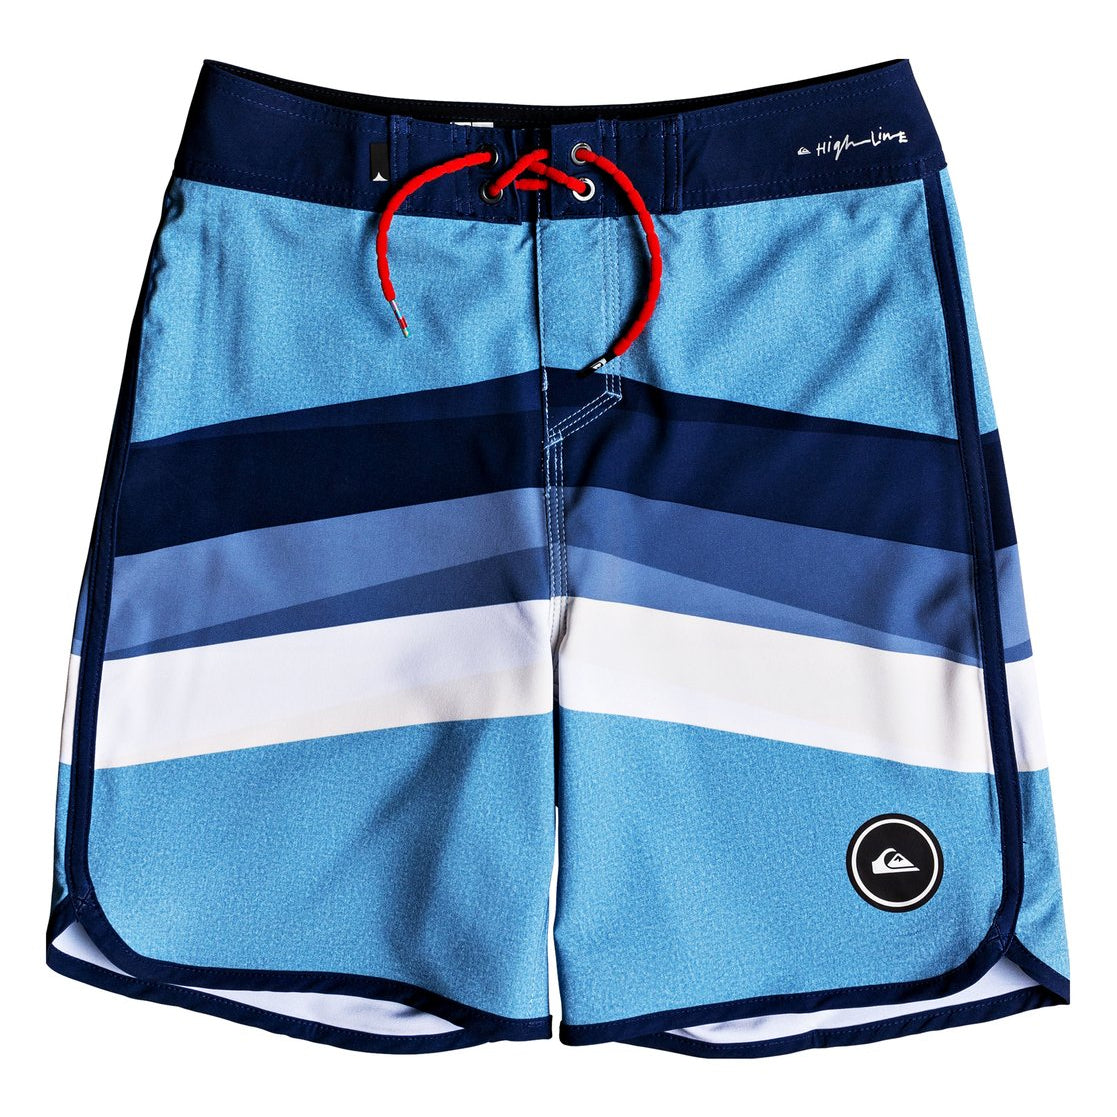 Quiksilver Highline Reverse Youth Boardshort BNG6 27